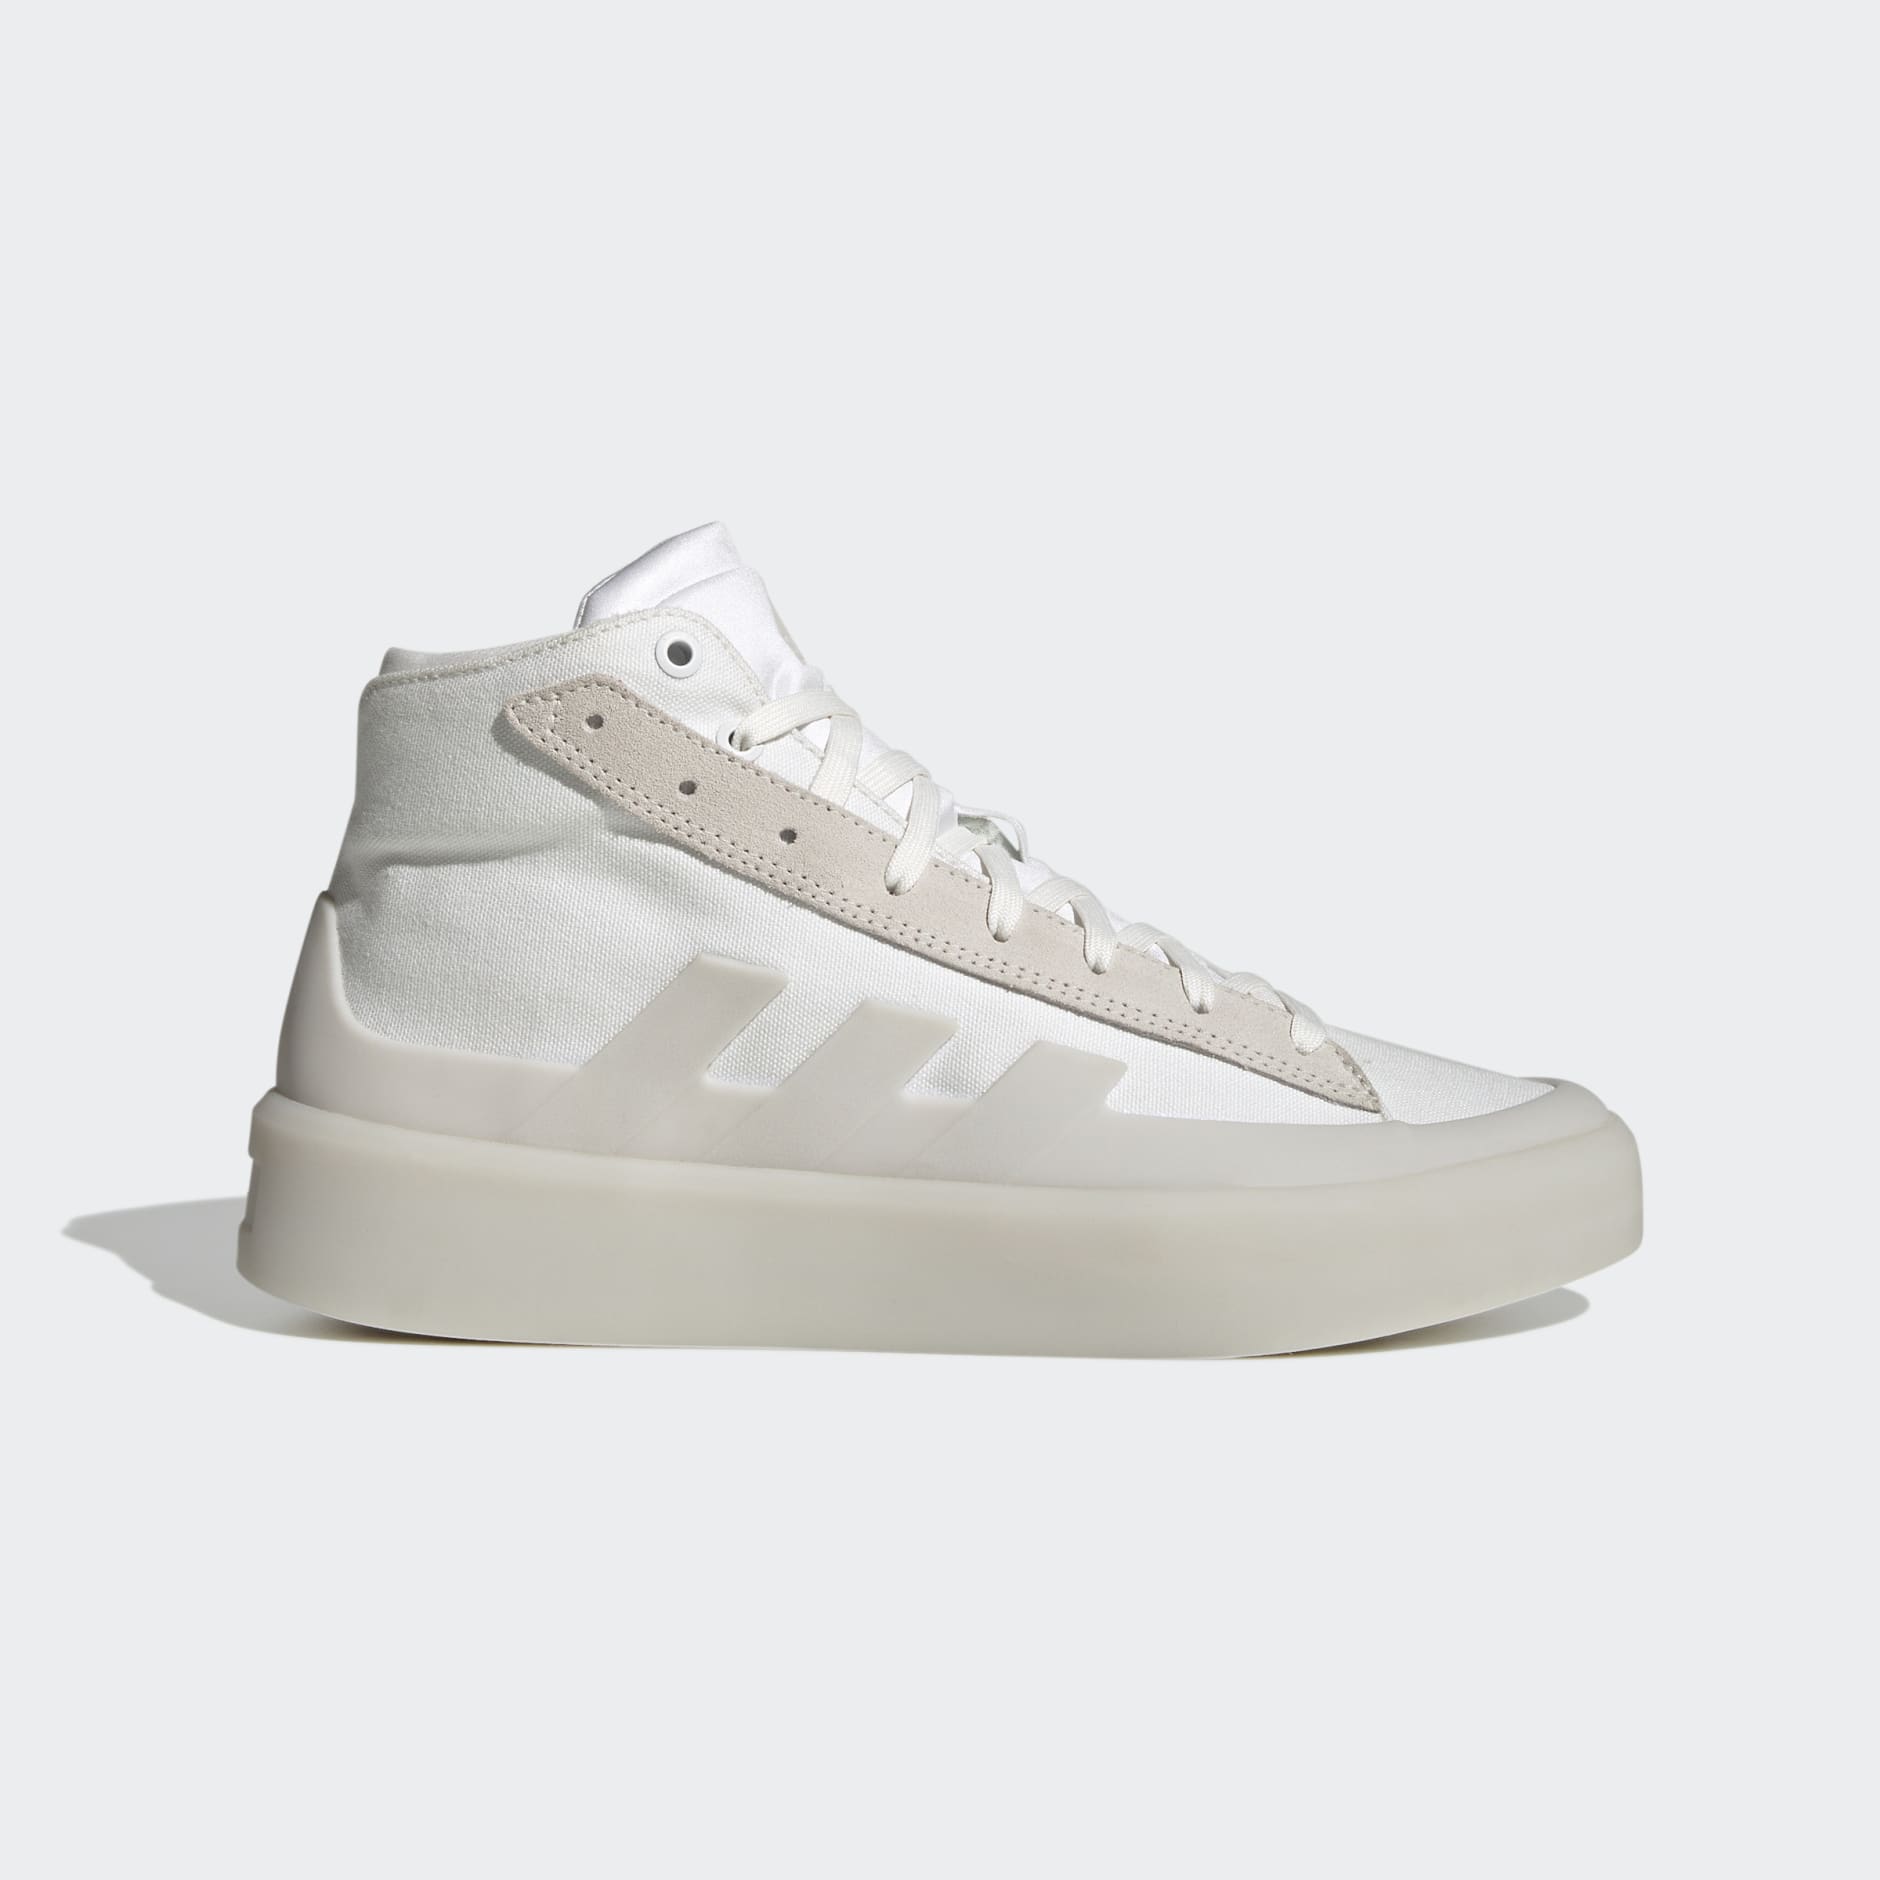 All products - ZNSORED HI Lifestyle Adult Shoe - White | adidas South ...